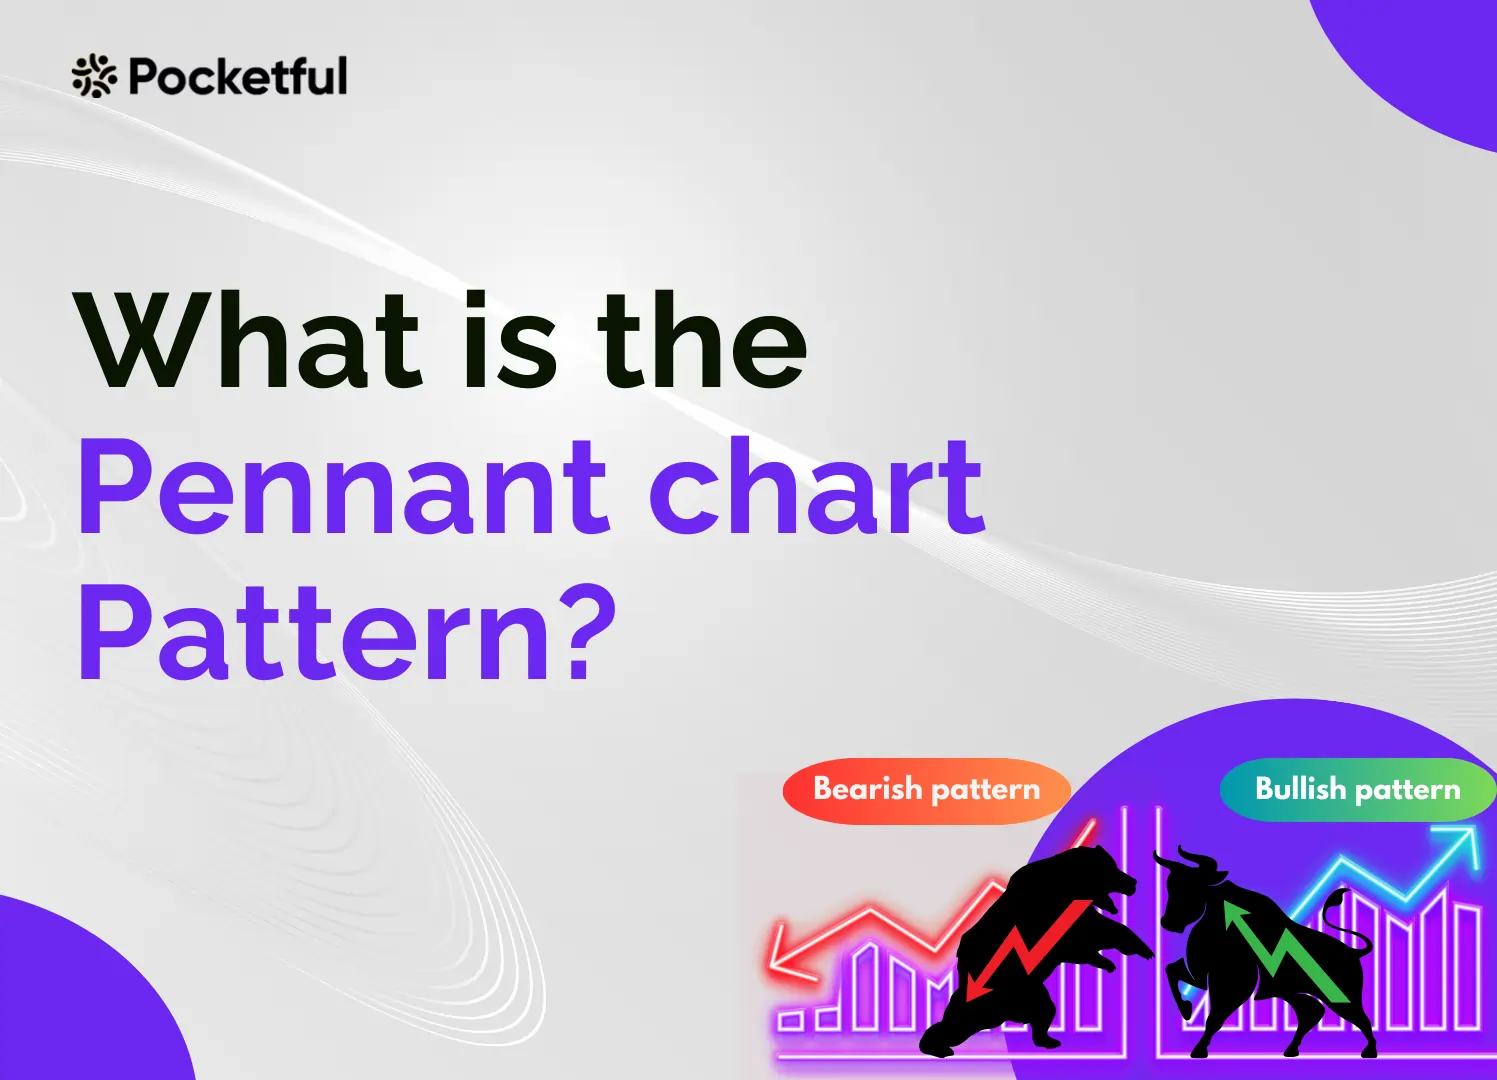 What Is the Pennant Chart Pattern?